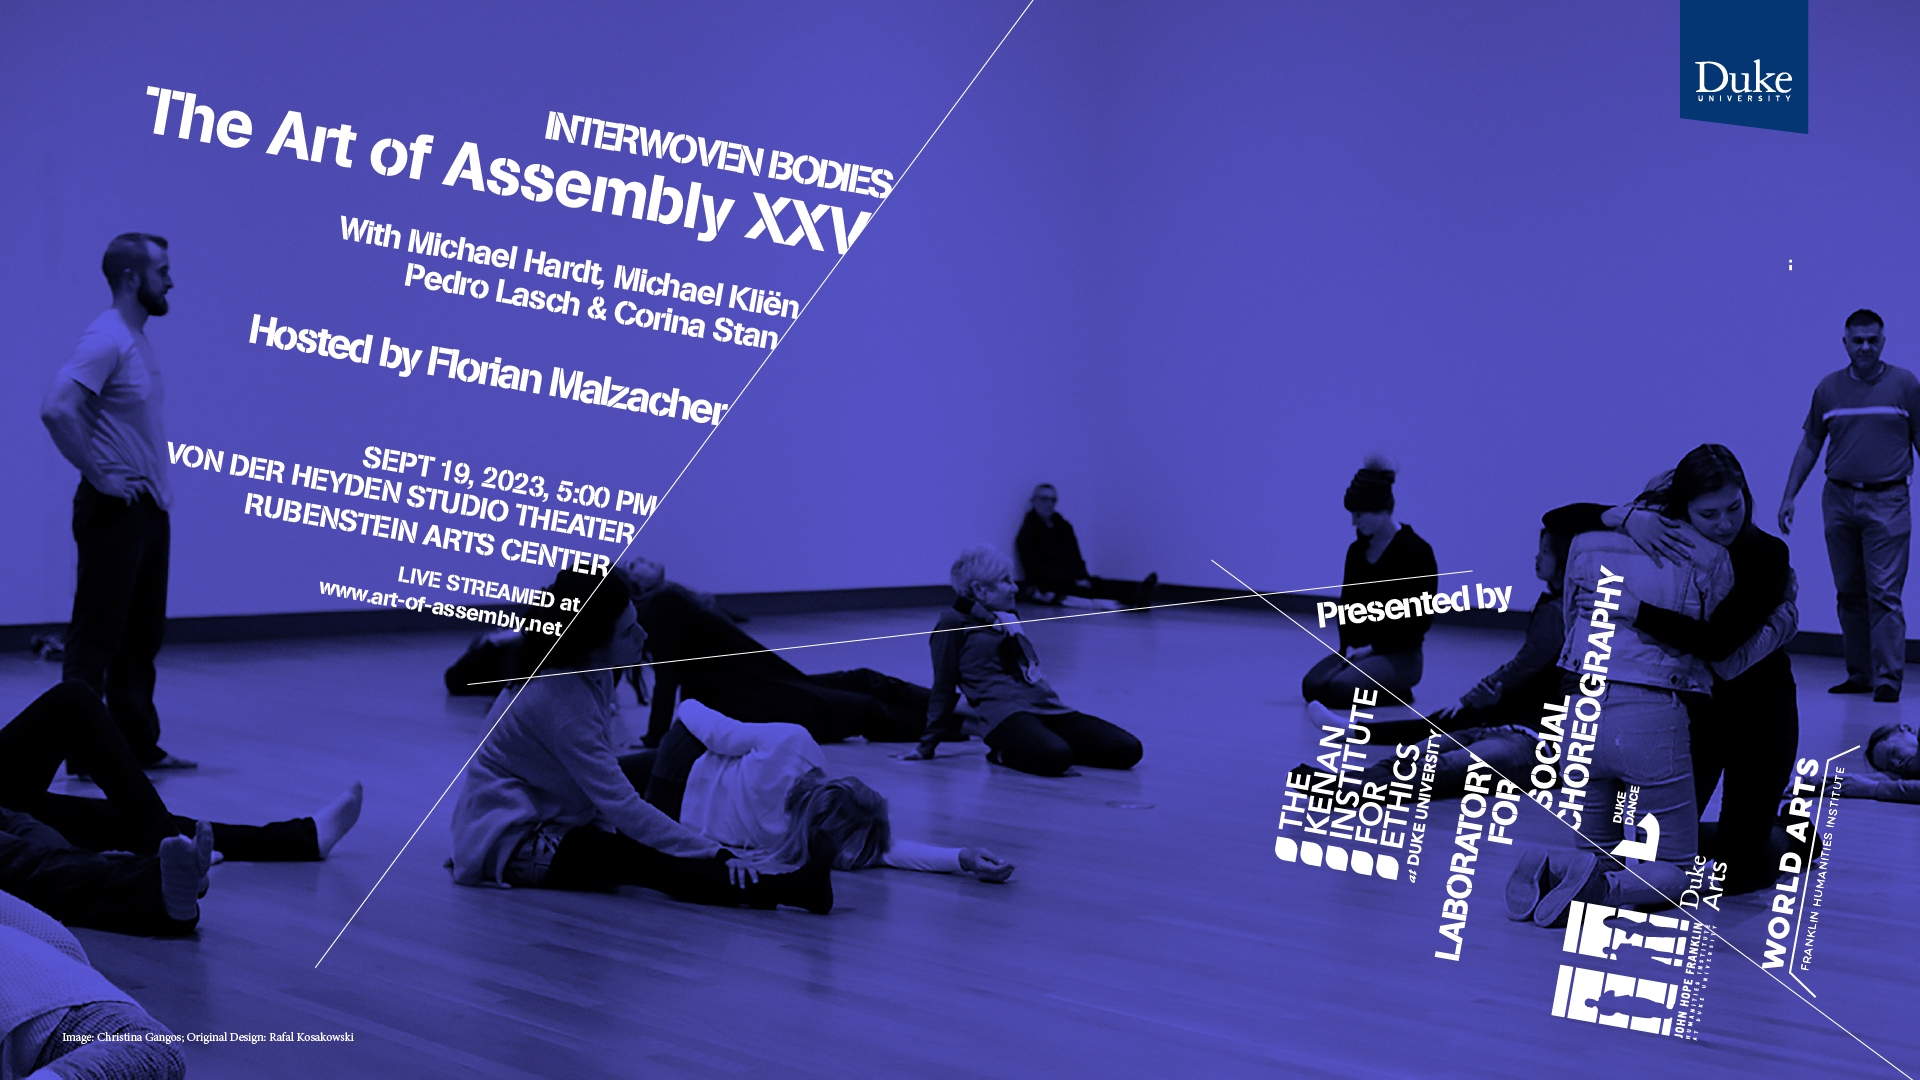 Interwoven Bodies The Art of Assembly XXV